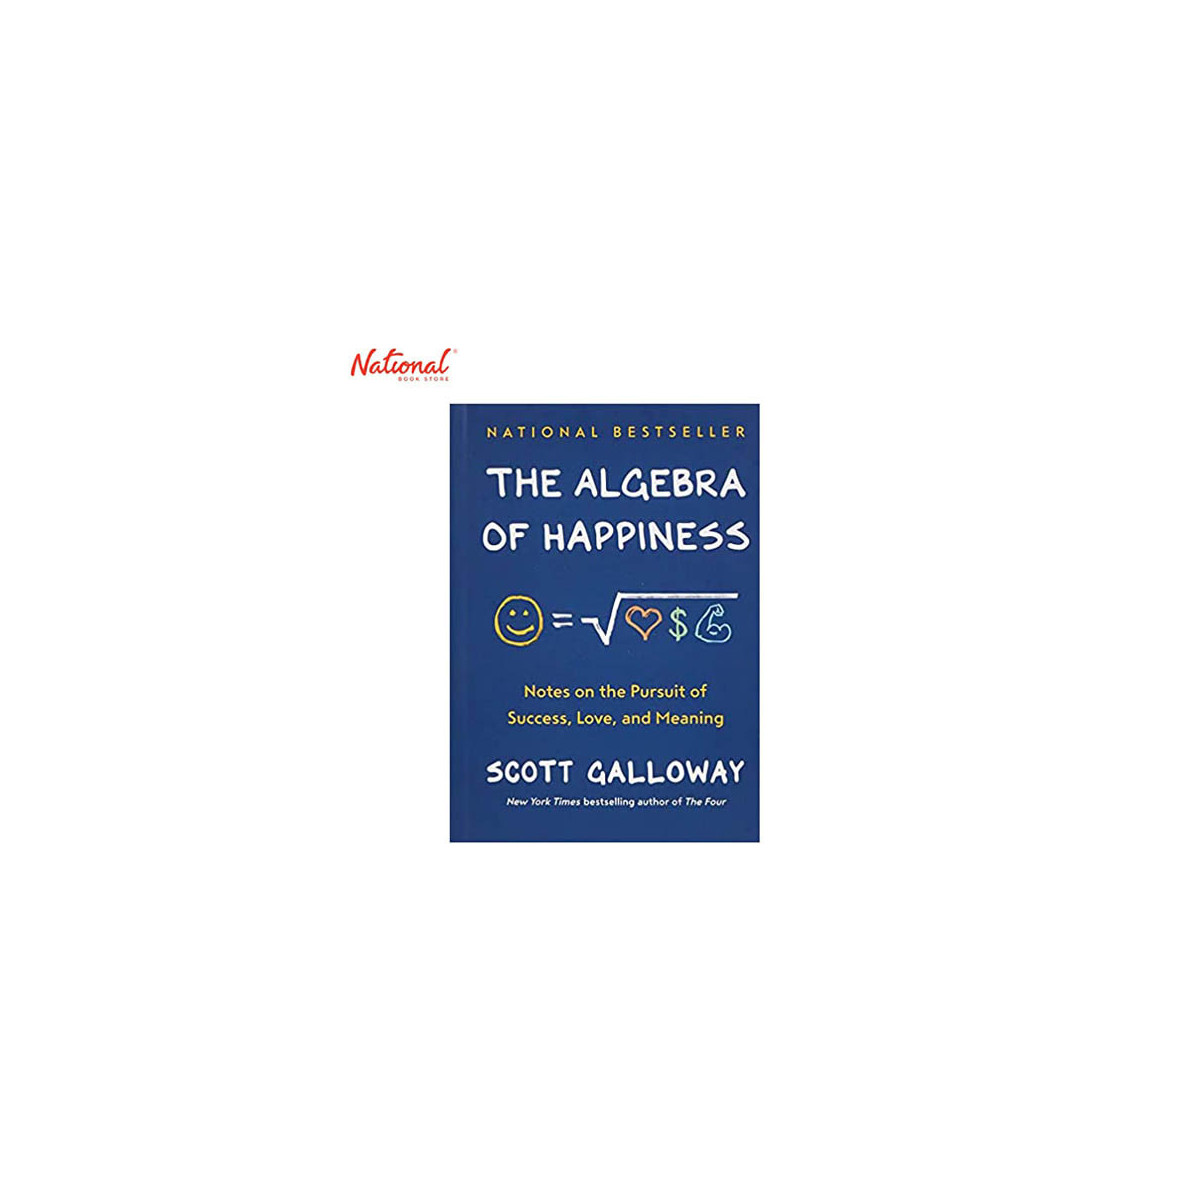 The Algebra of Happiness Hardcover by Scott Galloway